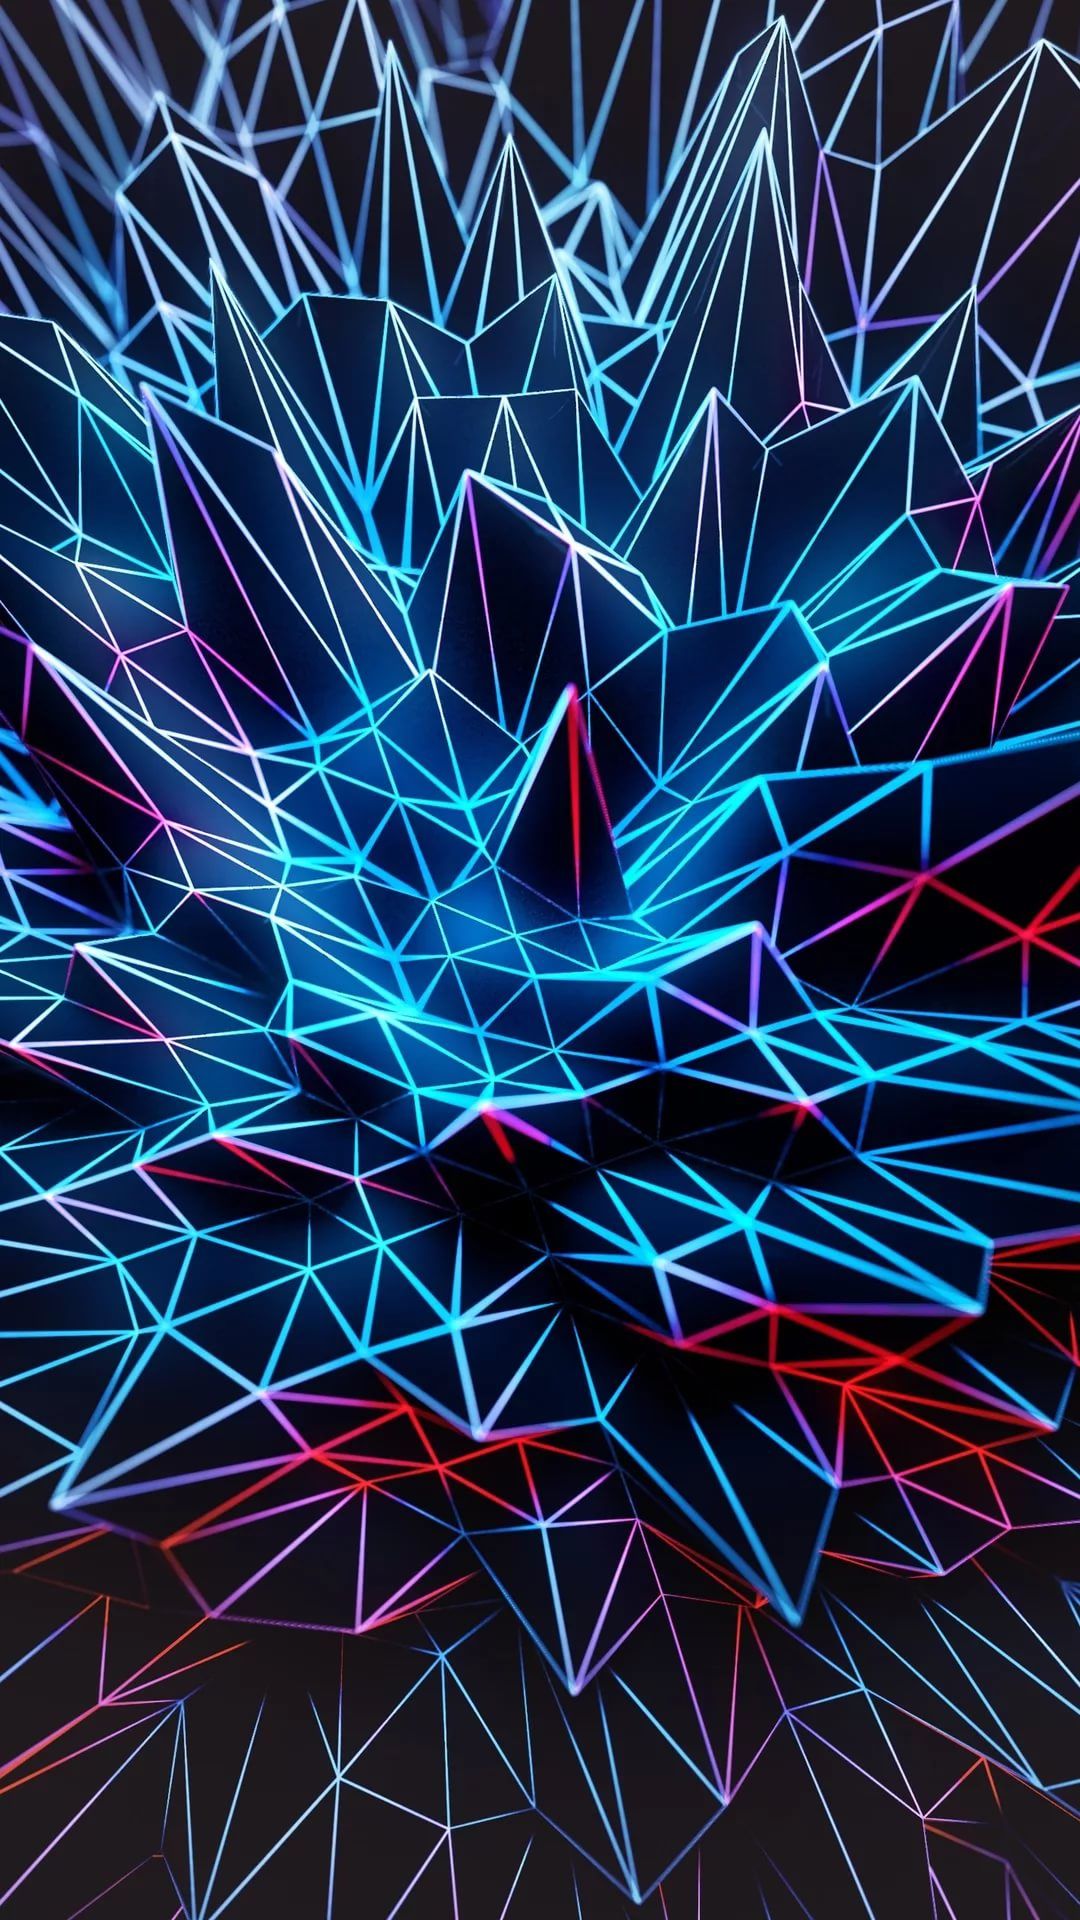 Abstract Iphone Wallpapers Iphone11 スマホ壁紙 待受画像ギャラリー